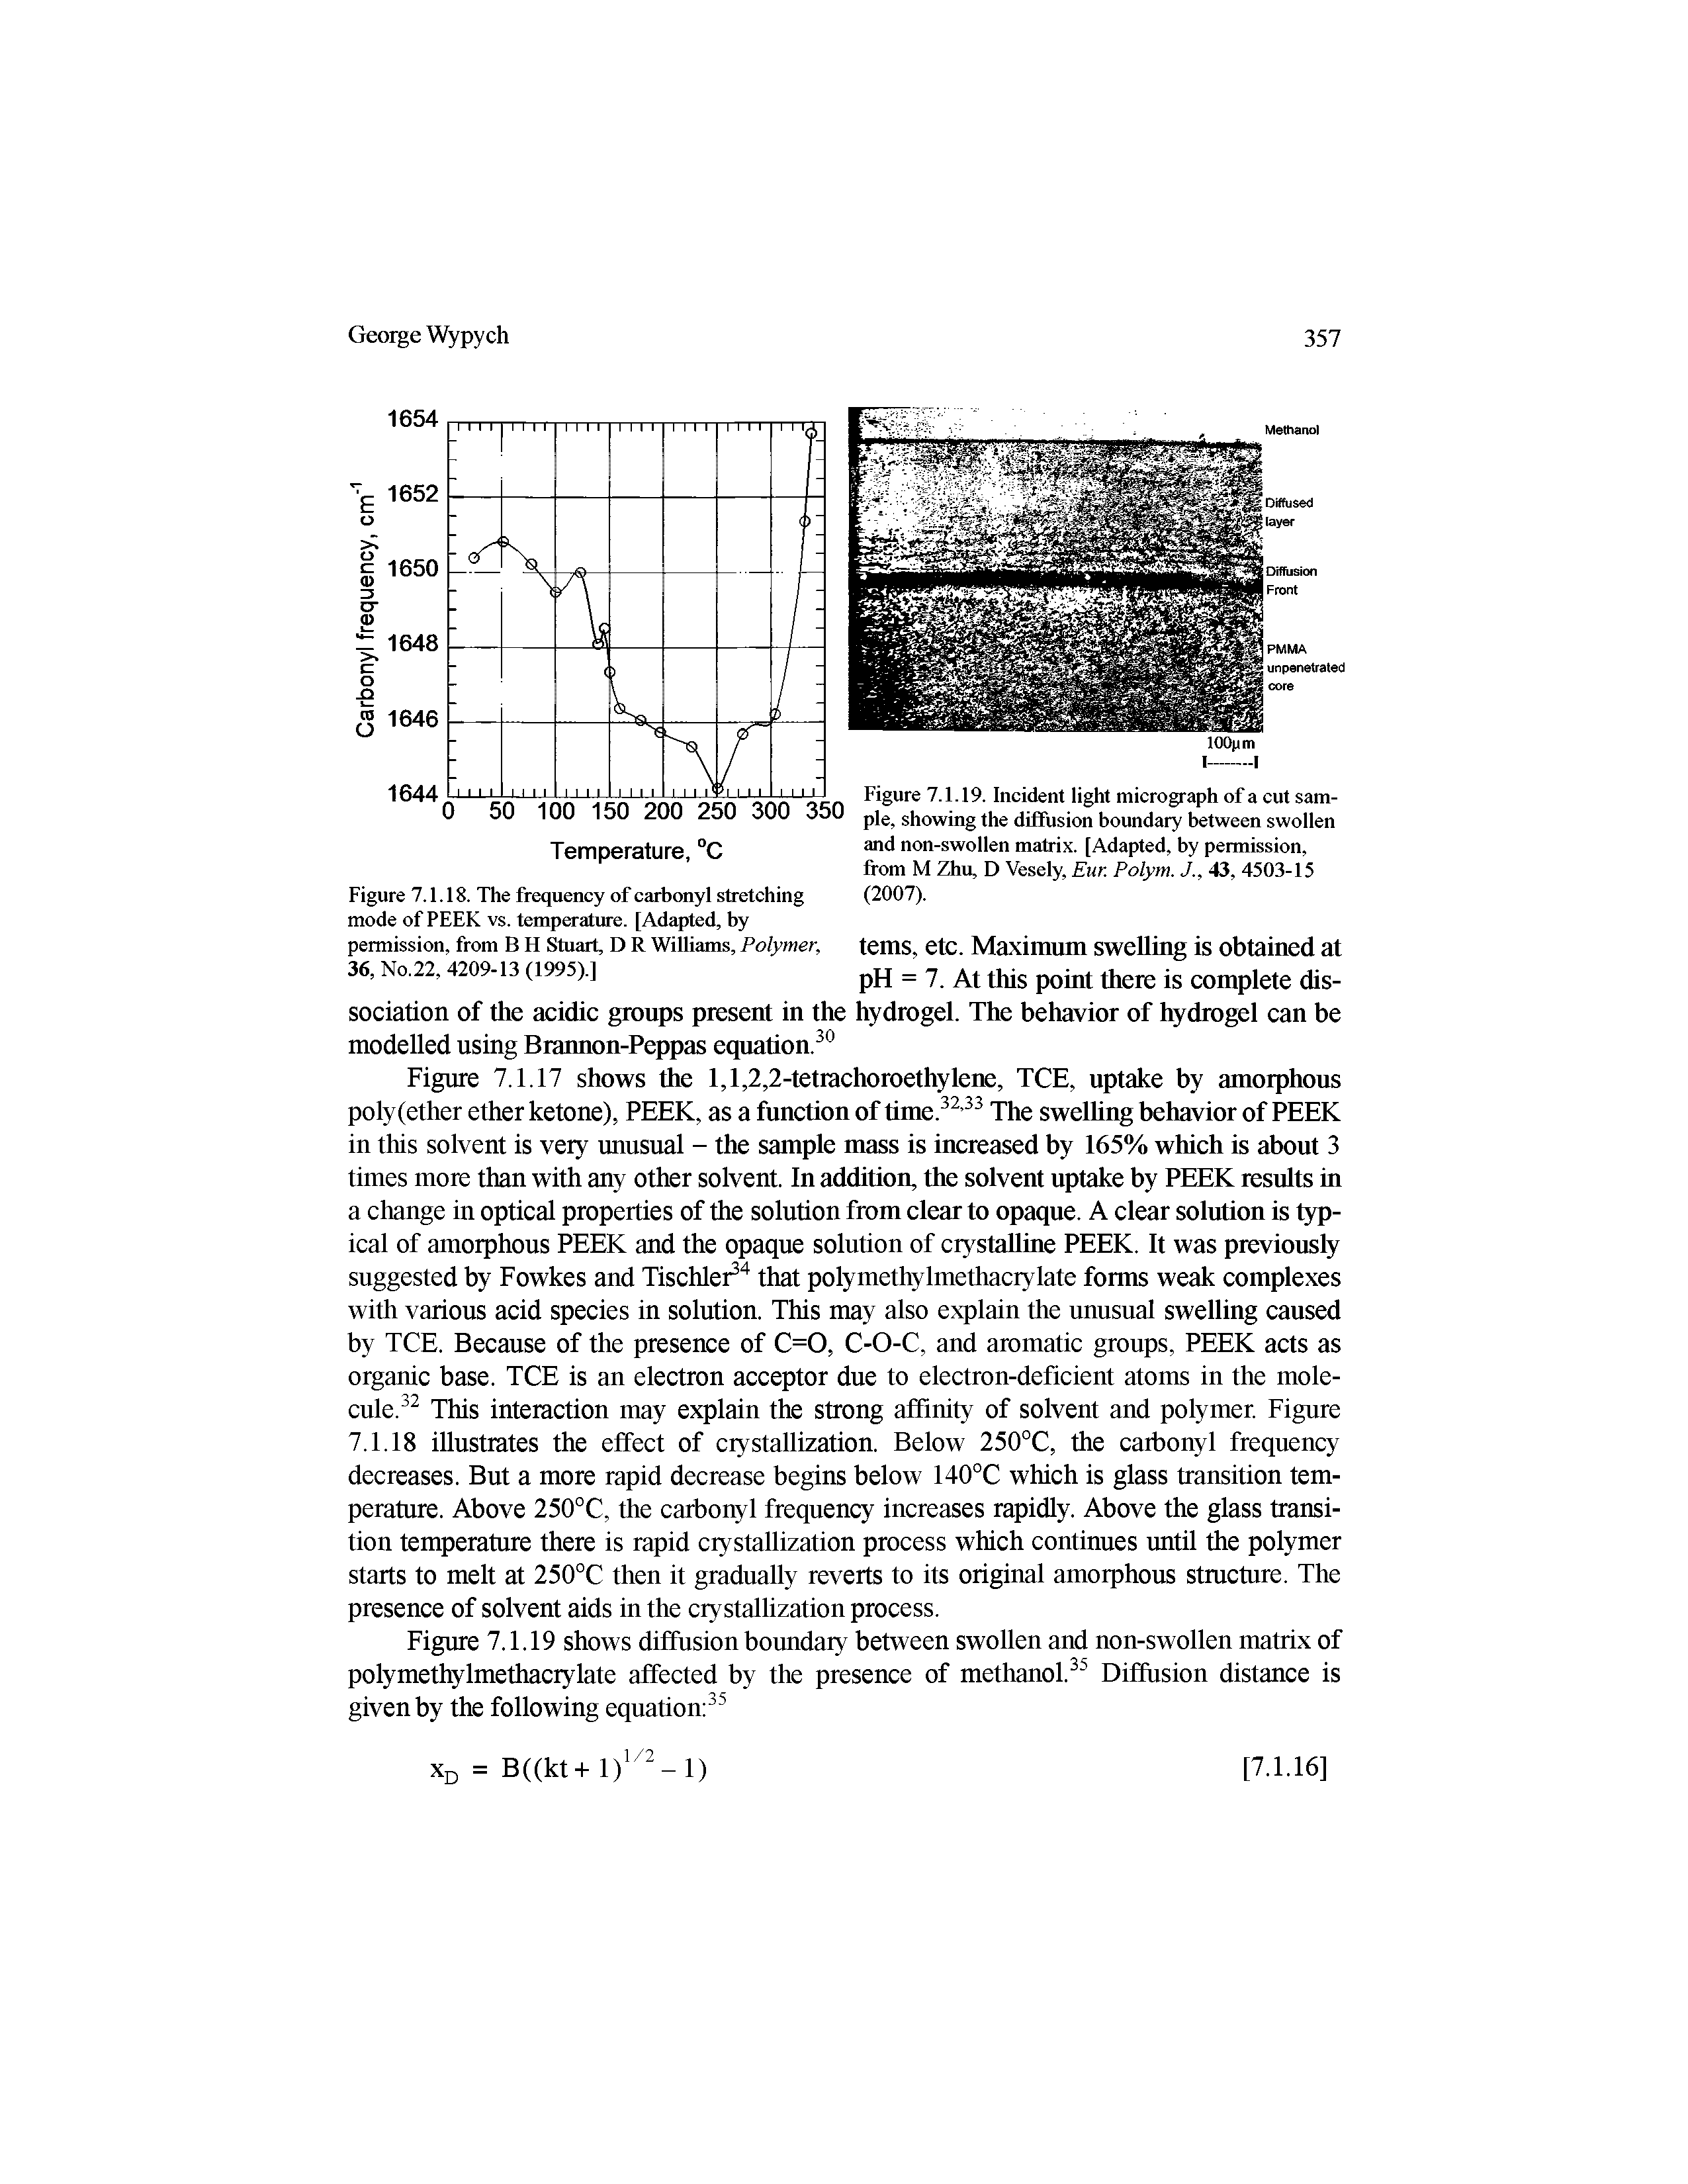 Figure 7.1.18. The frequency of carbonyl stretching mode of PEEK vs. temperature. [Adapted, by permission, from B H Stuart, D R Williams, Polymer, 36, No.22, 4209-13 (1995).]...